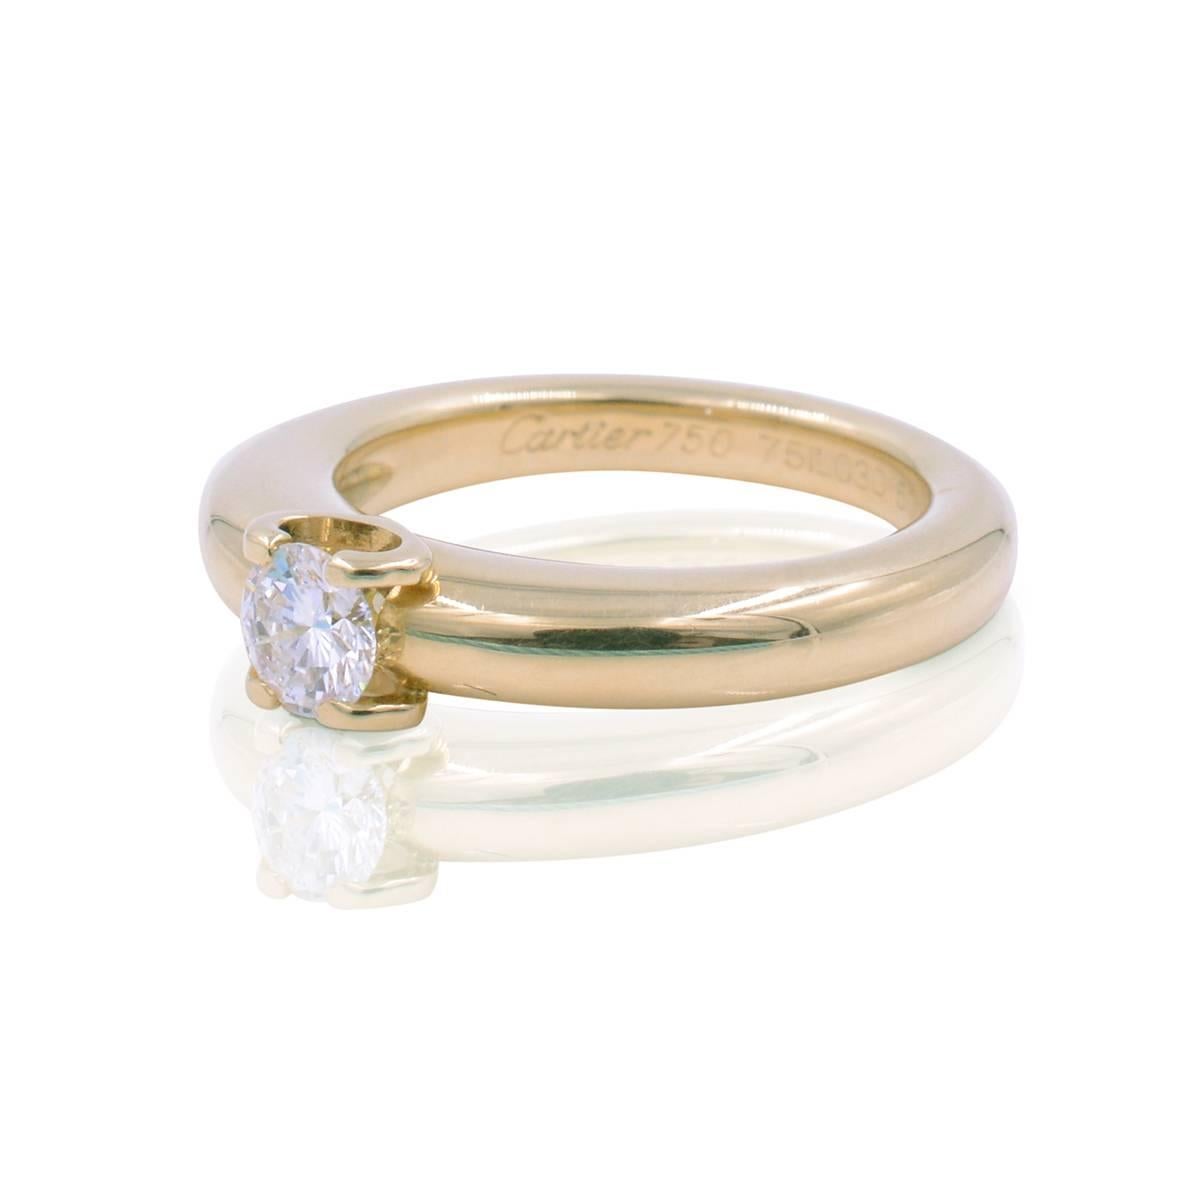 You are Purchasing Cartier 0.30 ct 18K Yellow Gold Round Brilliant Cut Diamond Solitaire Prong Set Engagement Ring. The ring weighs 7.8 grams and is 5.5 however fits a 6 as well (French Size 50). The center stone is a Round Brilliant Cut diamonds